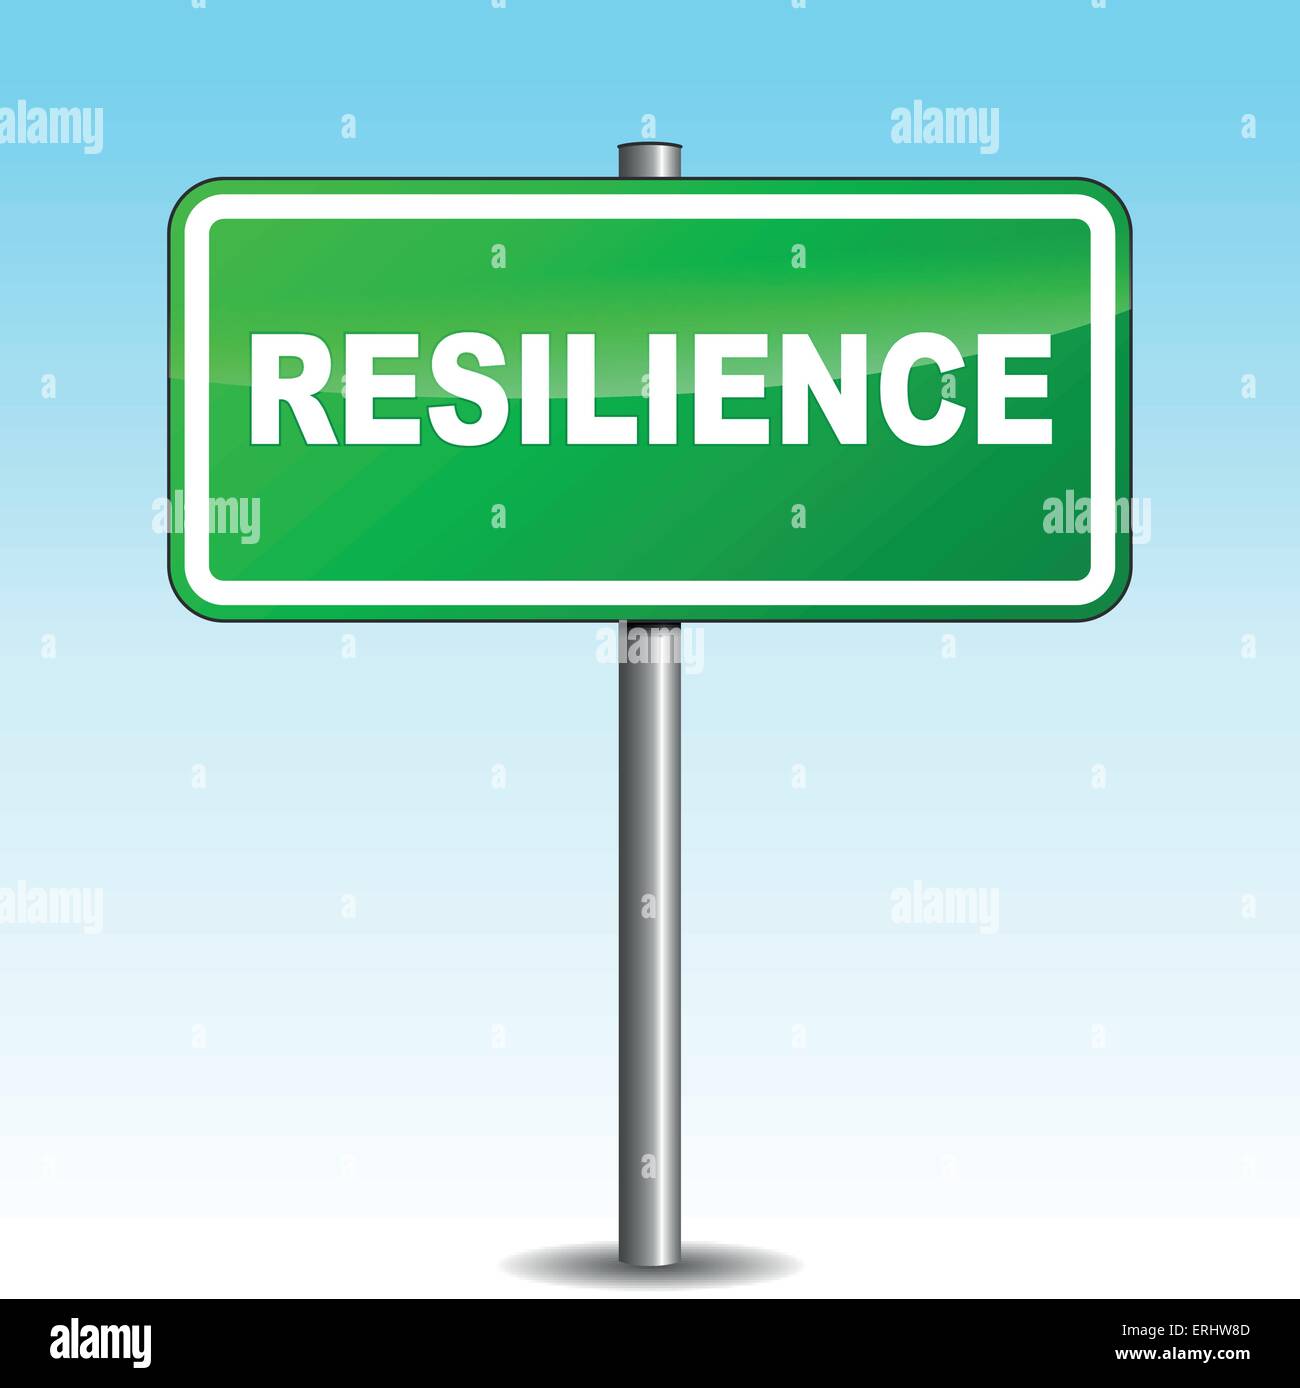 Vector illustration of resilience signpost on sky background Stock Vector